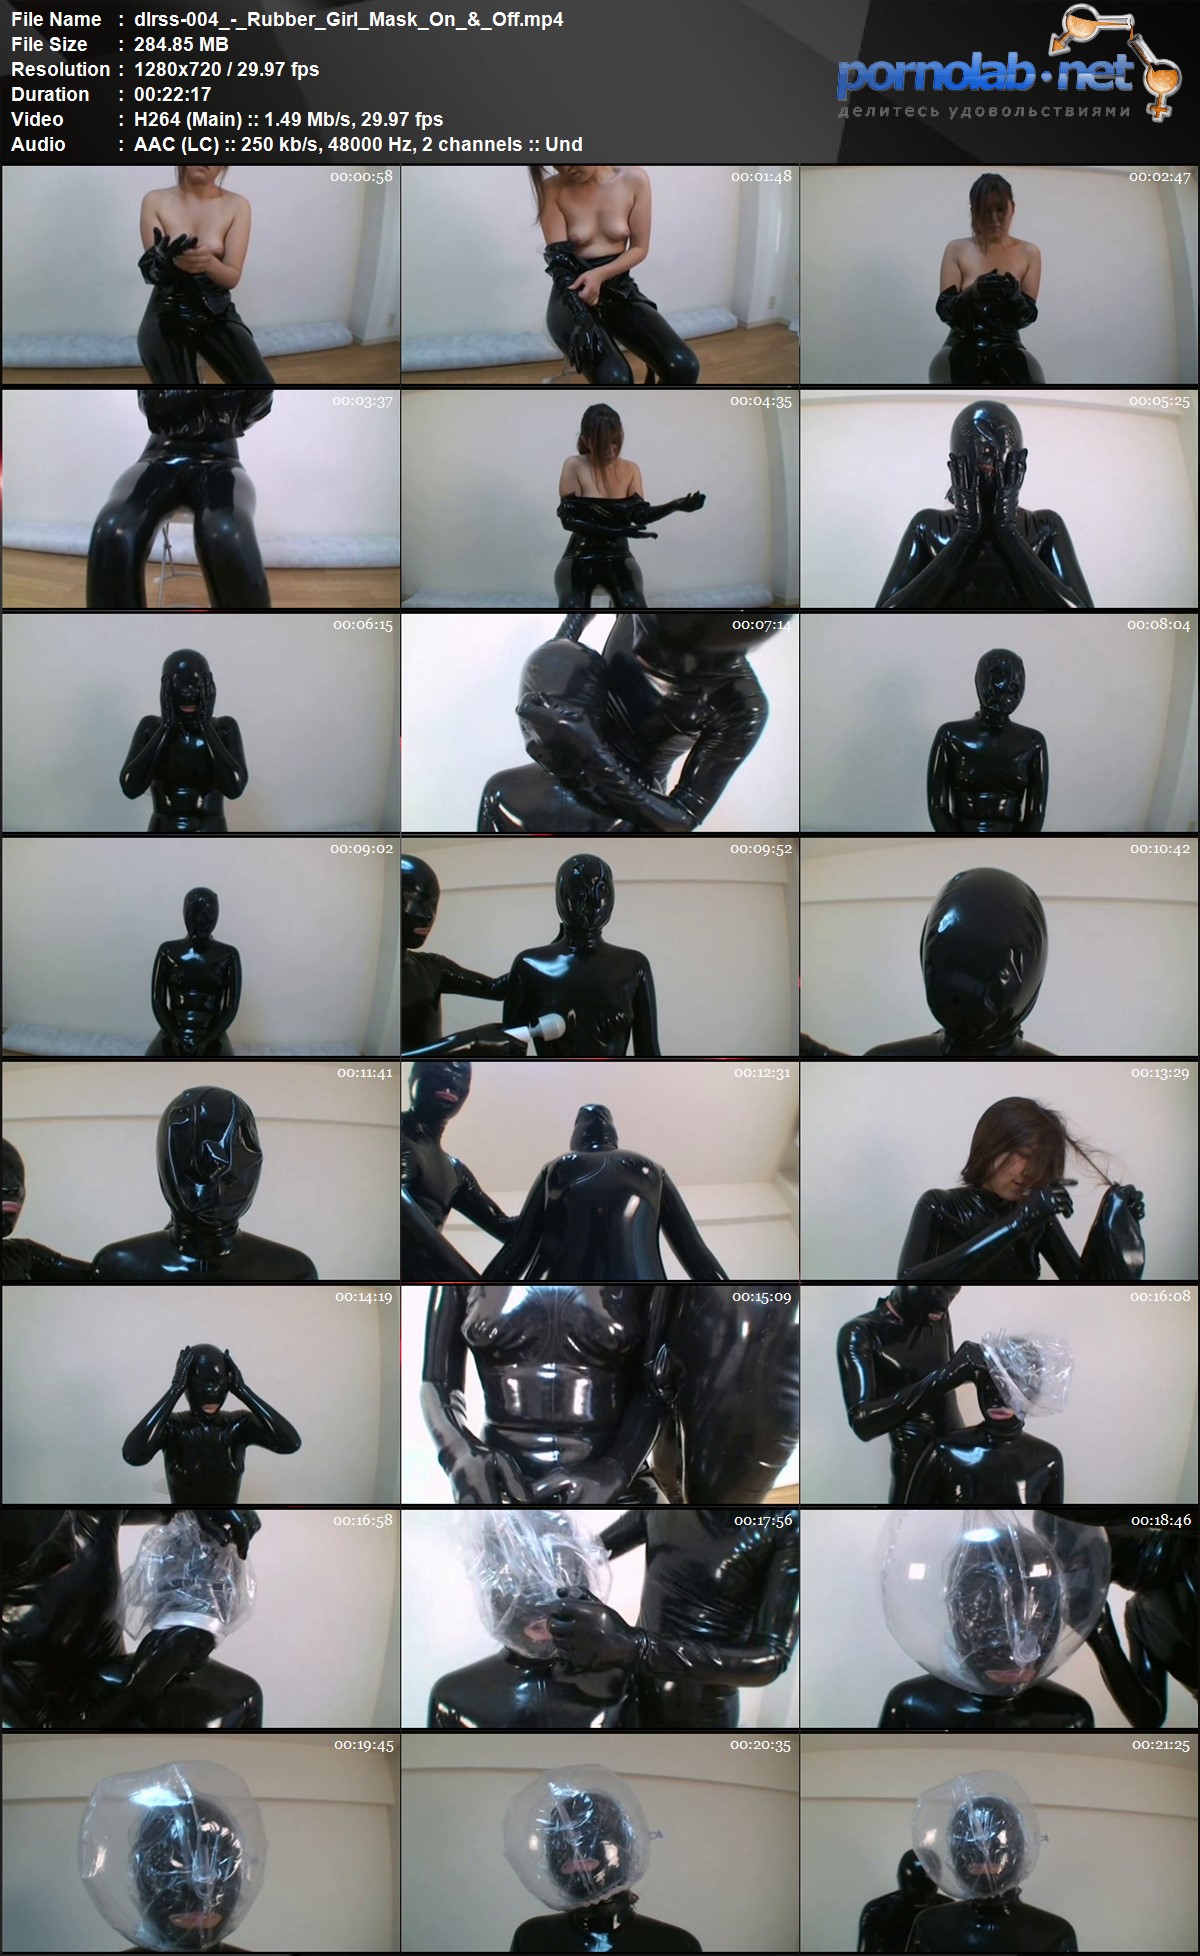 dlrss 004 Rubber Girl Mask On Off mp 4